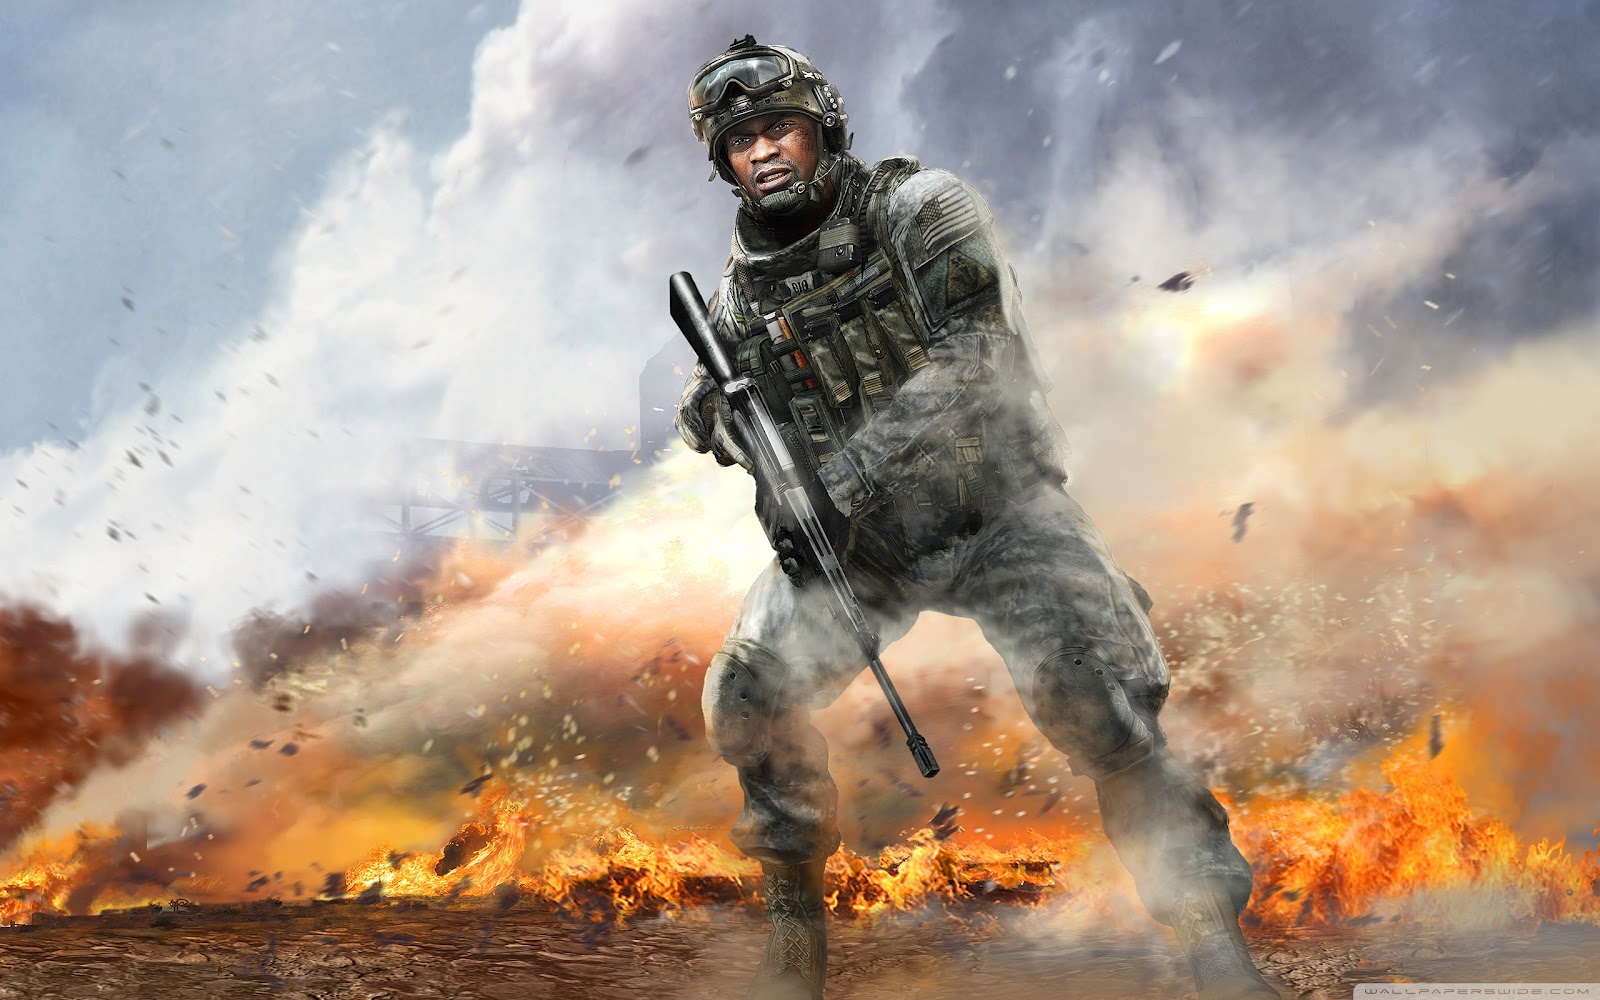 call wallpaper,soldier,explosion,event,strategy video game,pc game